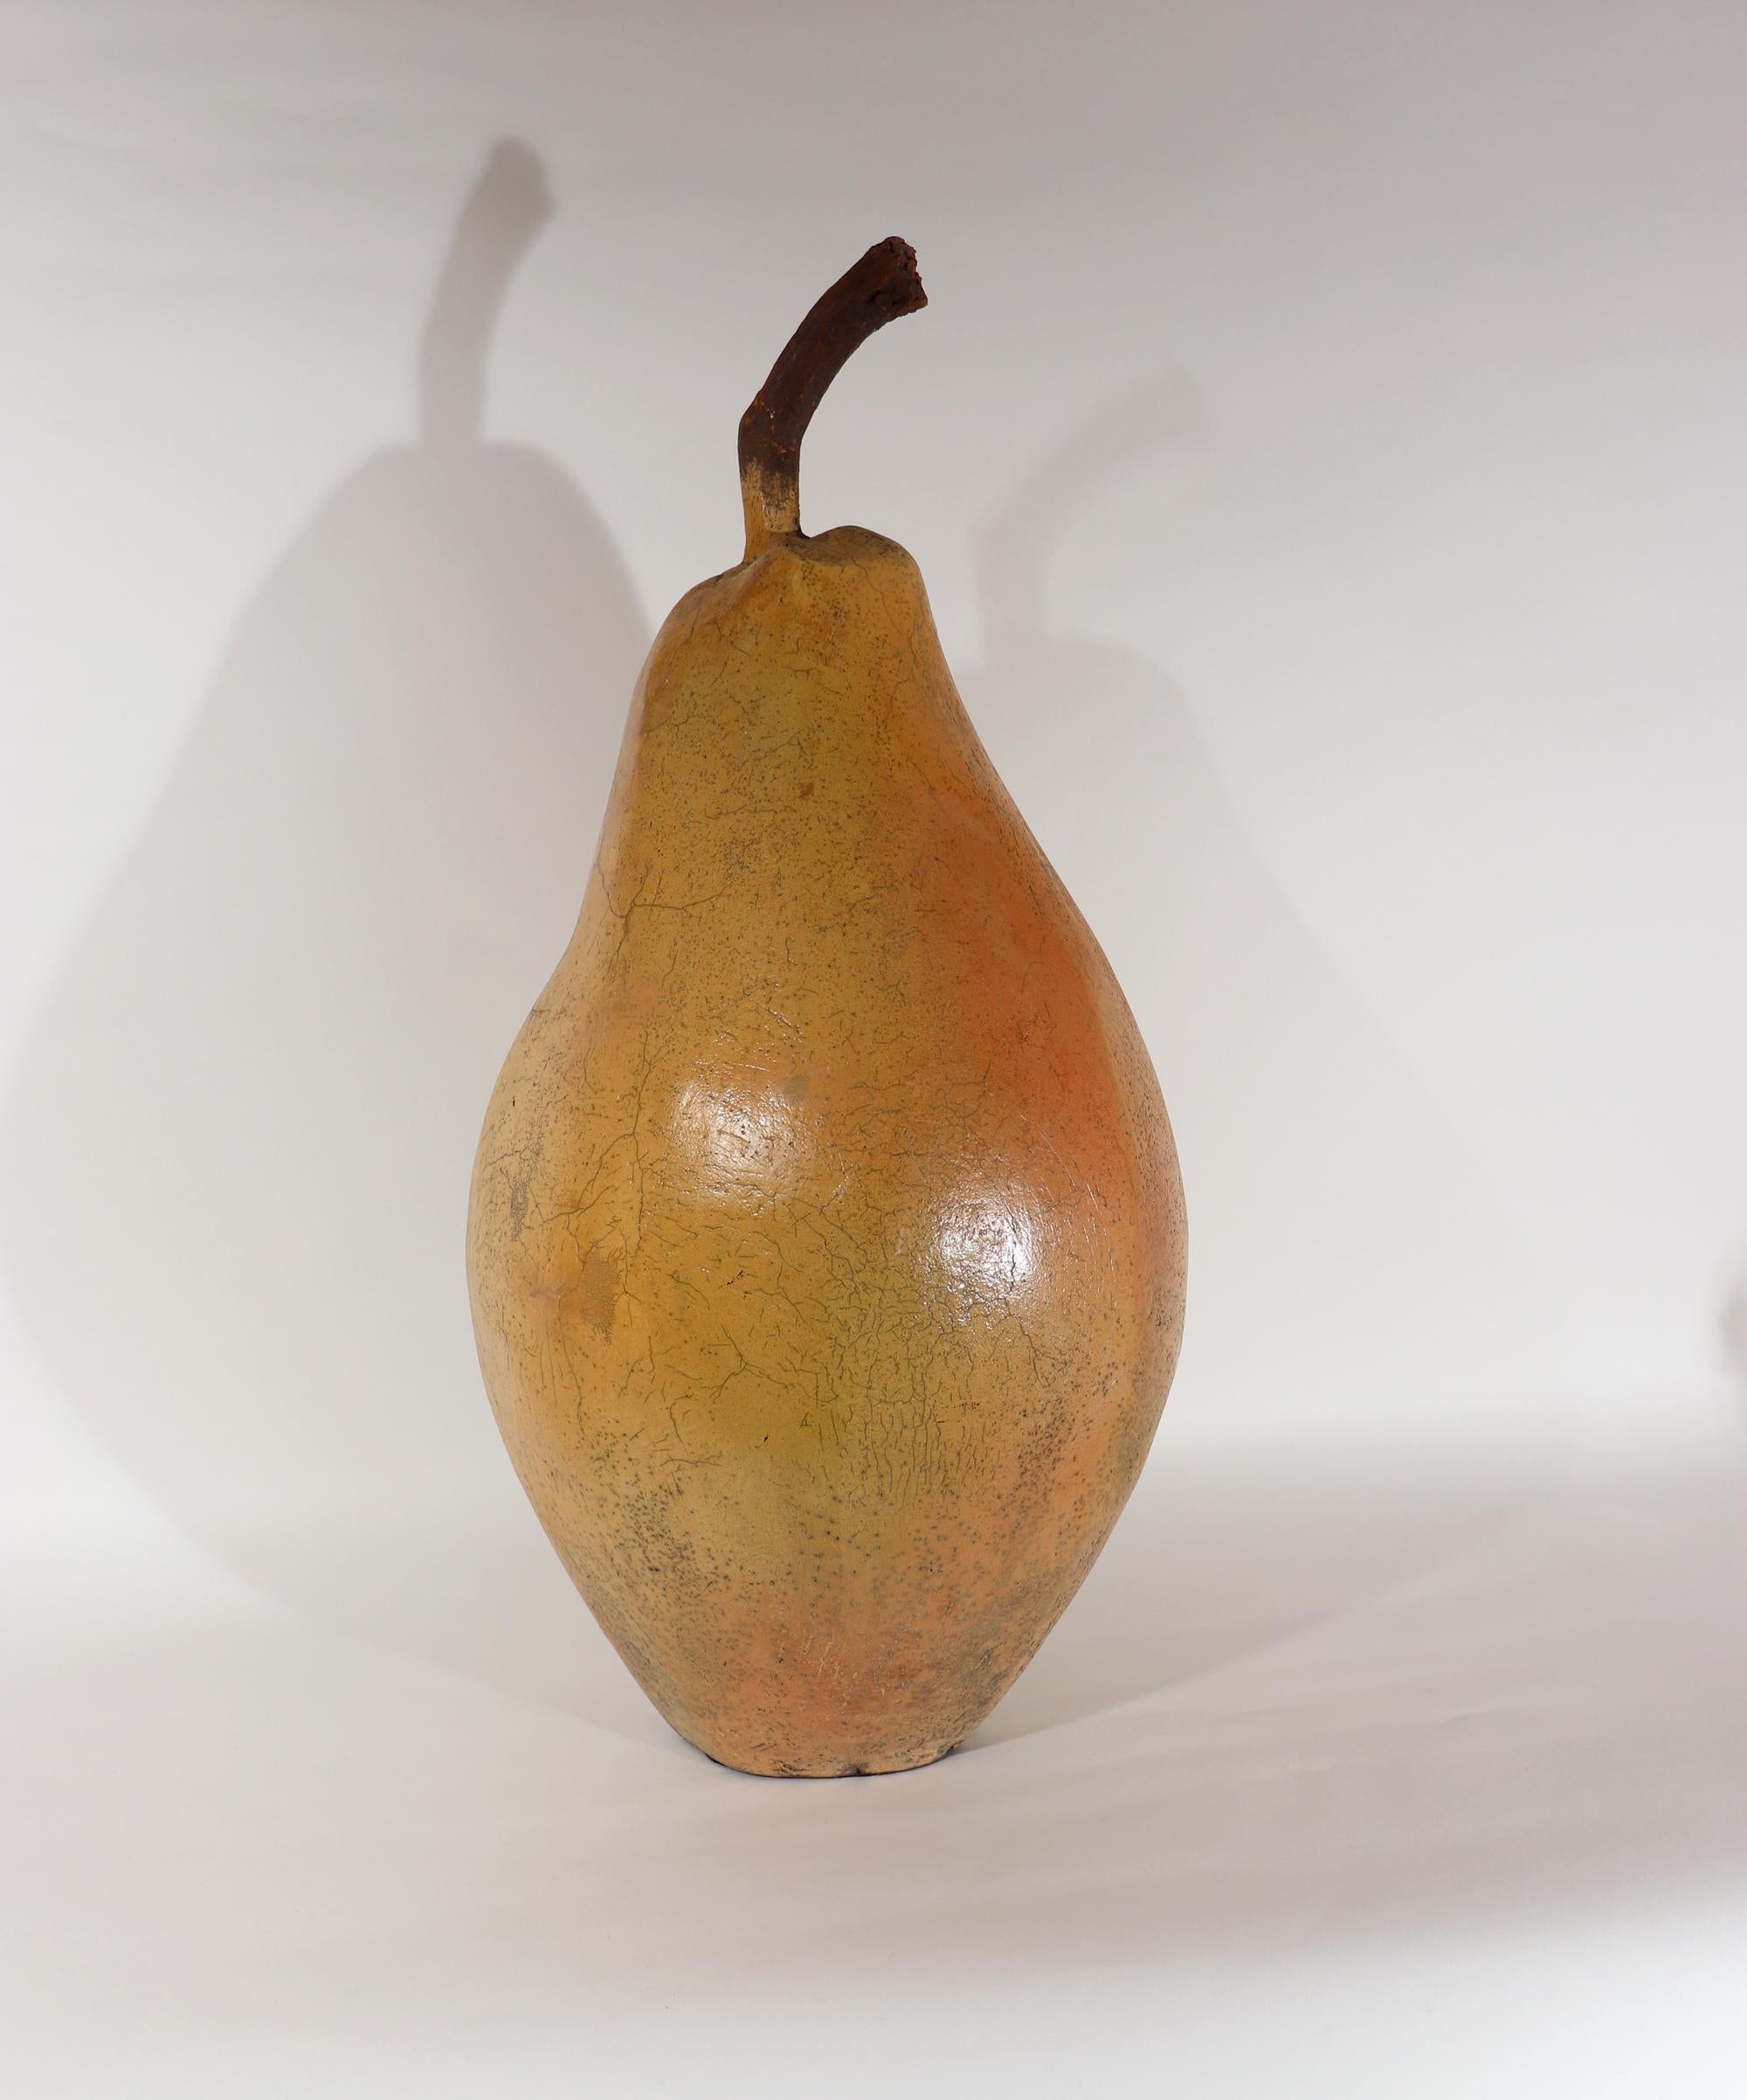 Oversized Raku Pottery Sculpture of a Pear by Renzo Faggioll For Sale 1